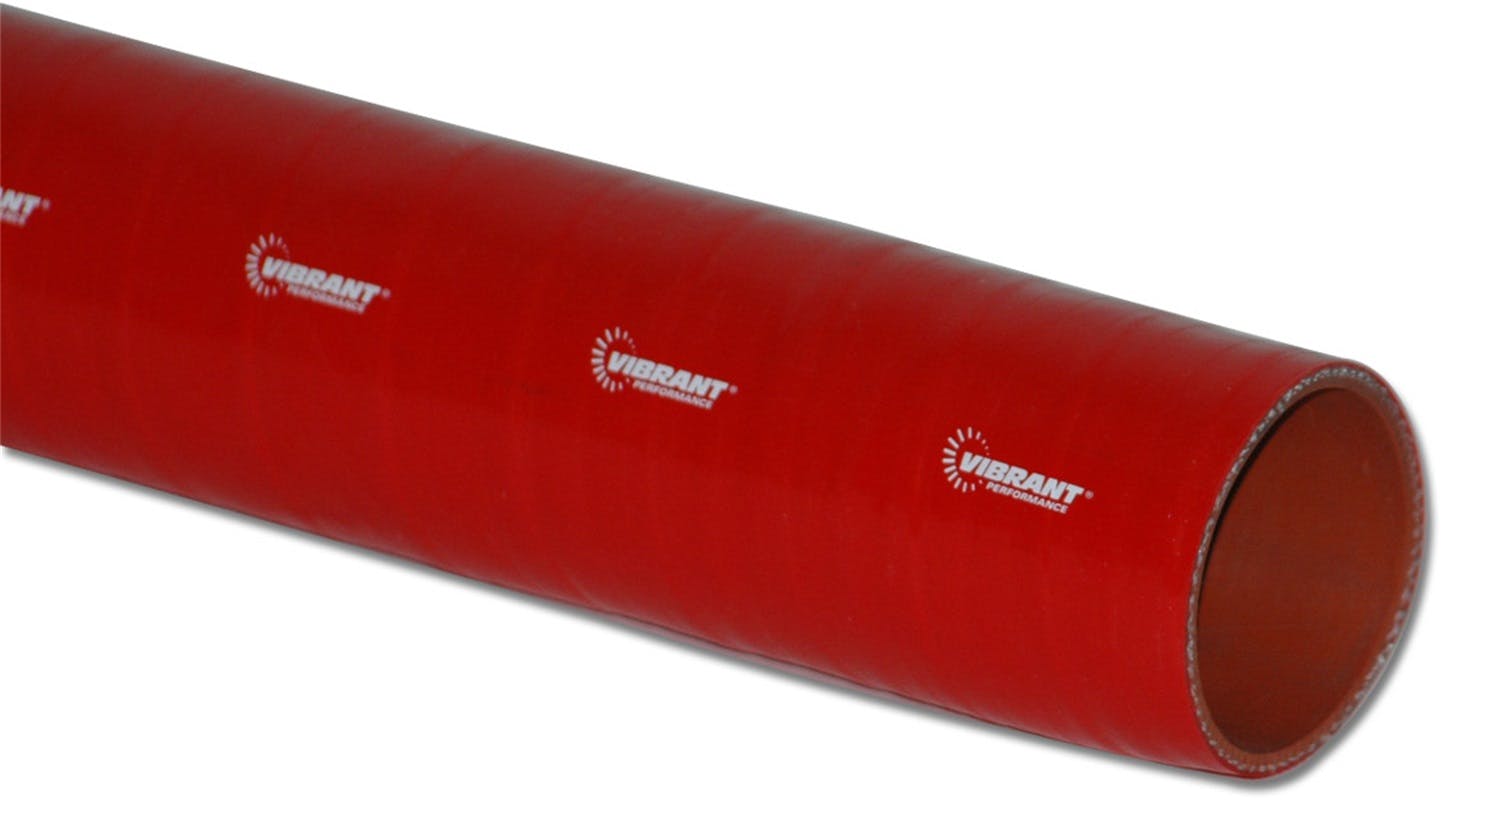 Vibrant Performance 27051R 4 Ply Silicone Sleeve, 1.75 inch I.D. x 12 inch Long - Red